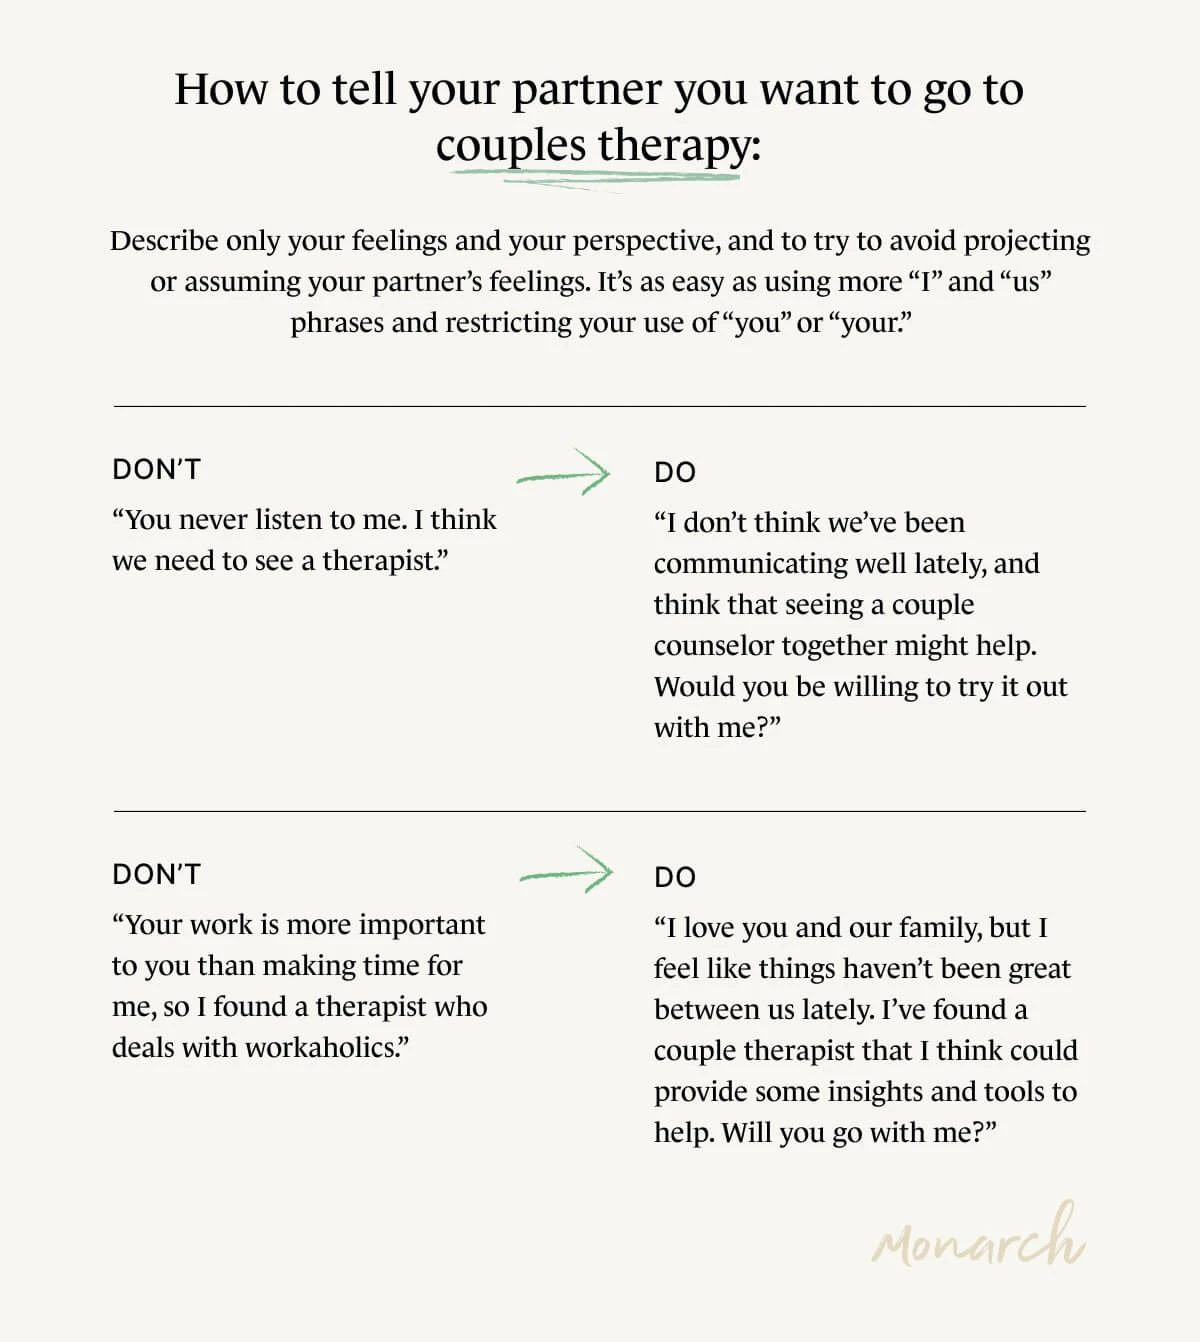 A Monarch by SimplePractice infographic showing examples of how to bring up couple's counseling to a partner. 